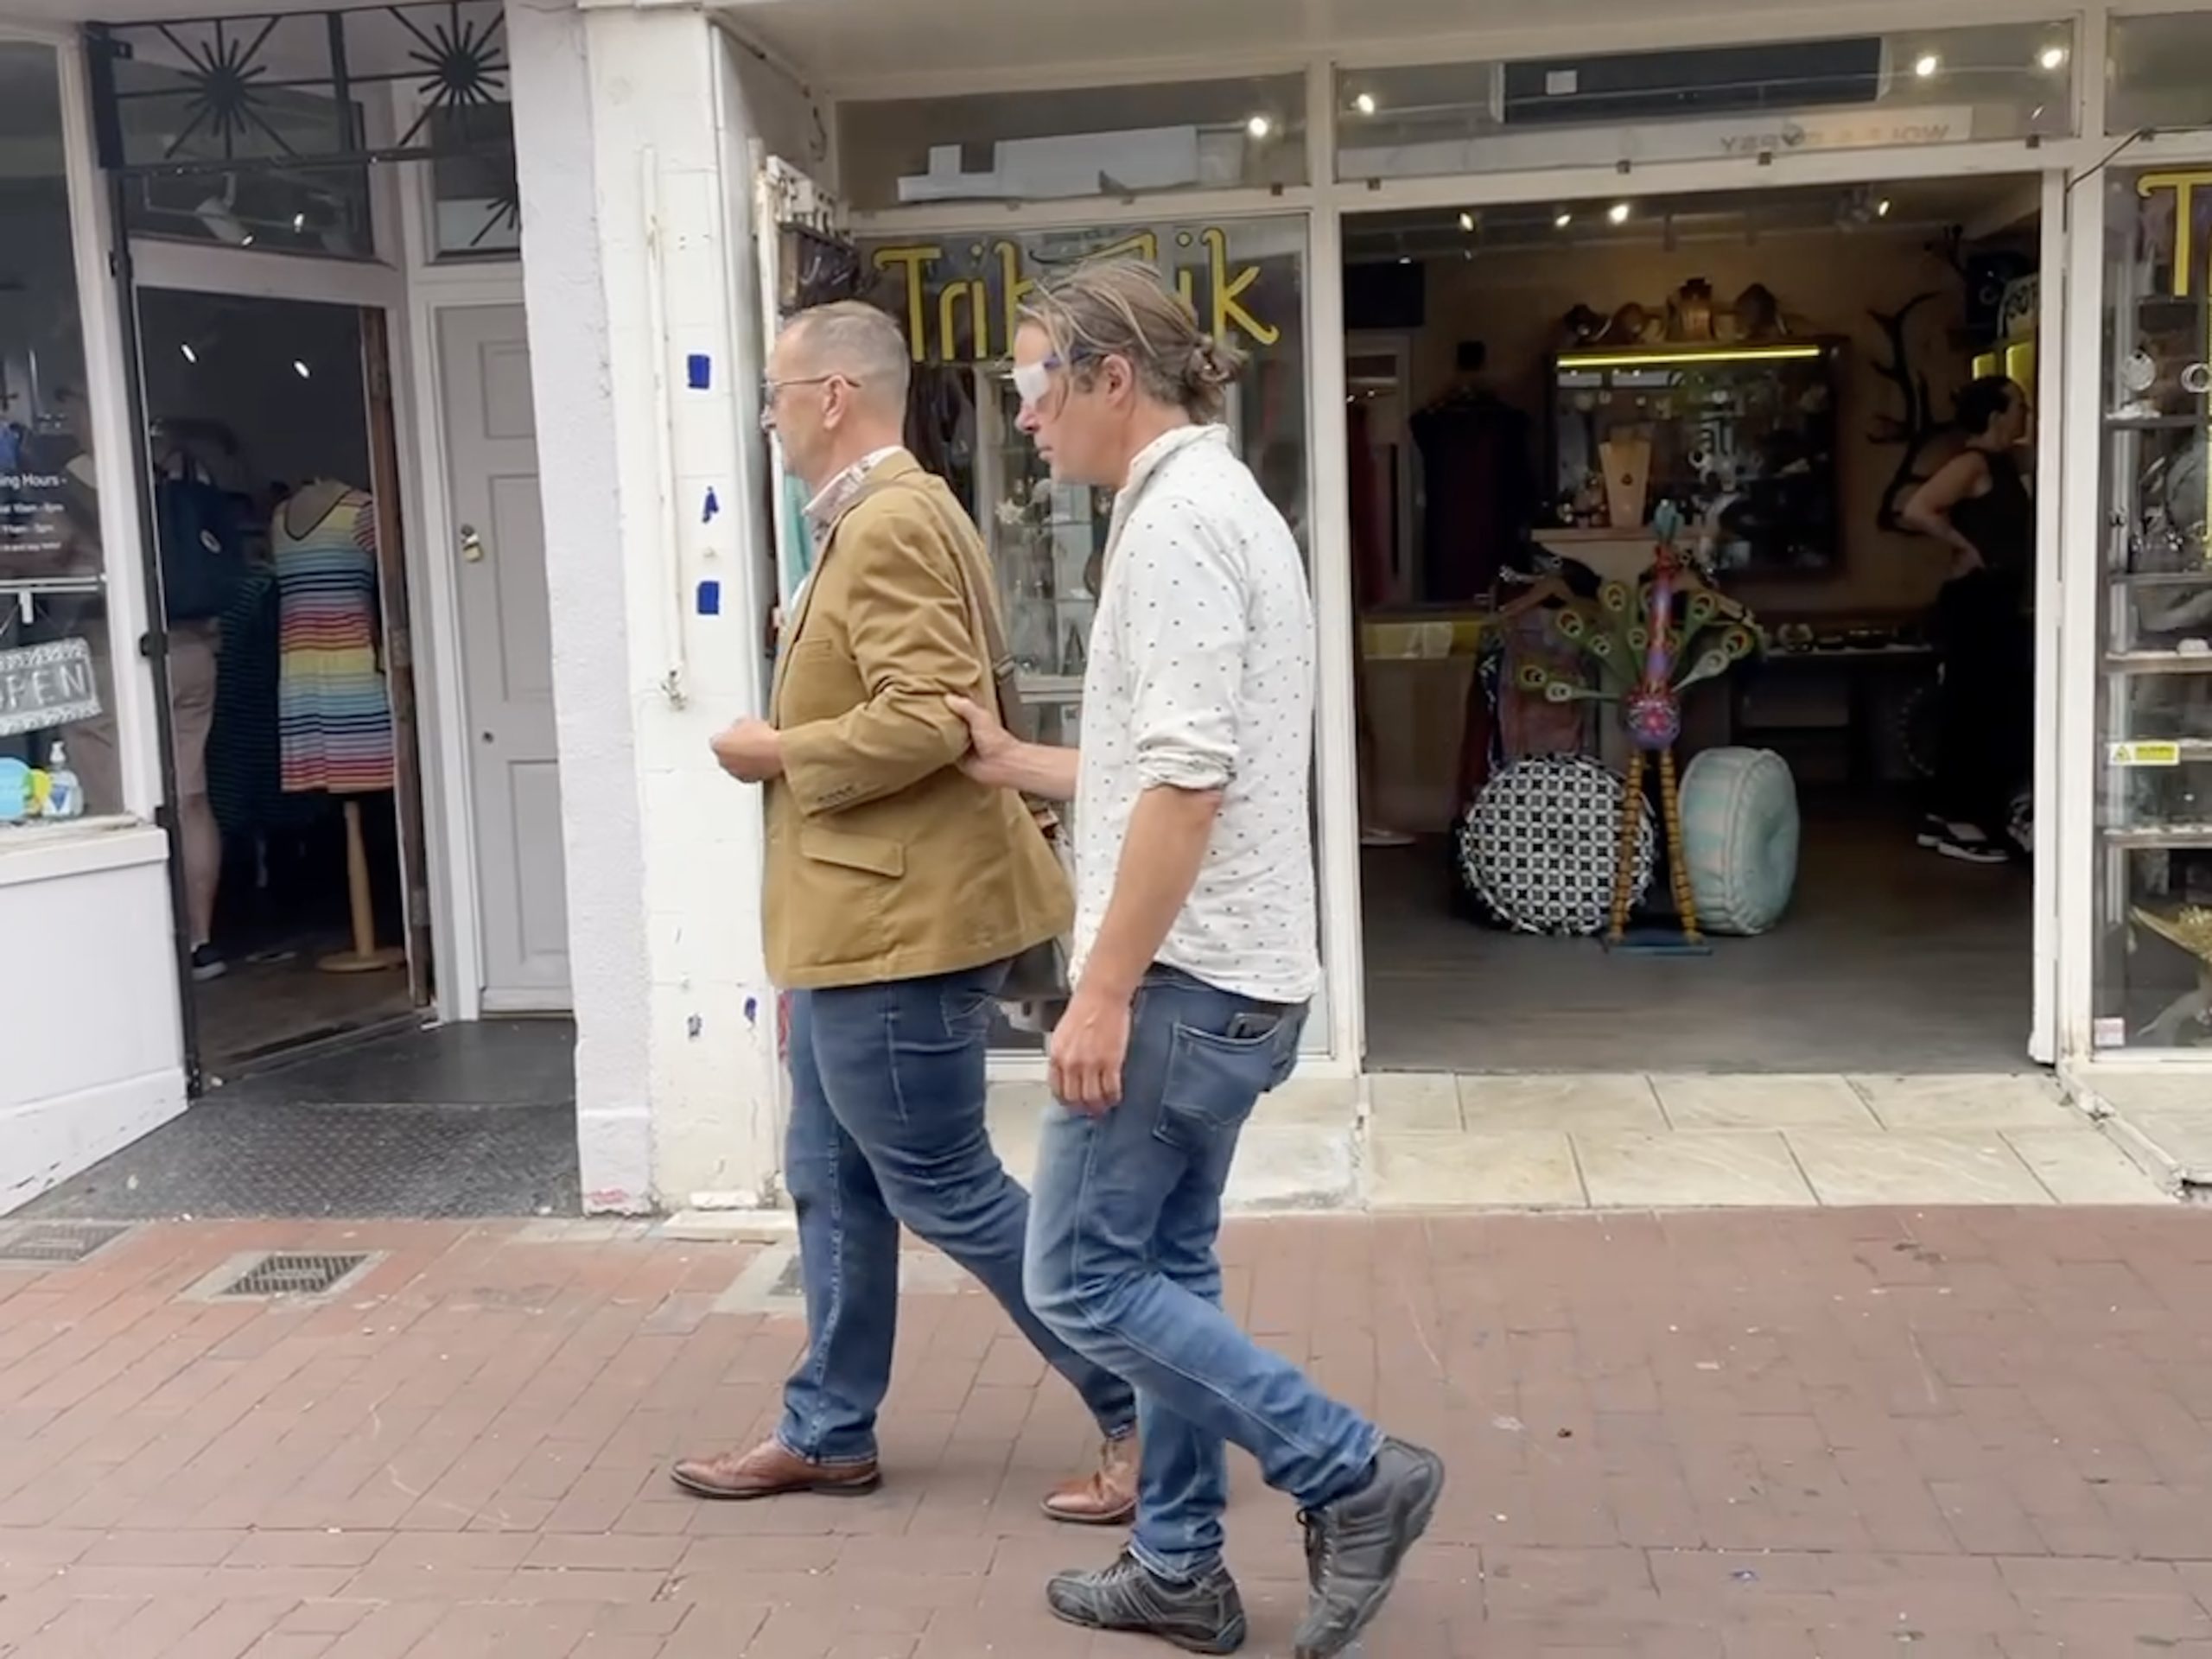 Cllr Jamie Lloyd being guided by Daniel Brookbanks, CEO of East Sussex Vision Support. Jamie is holding onto Daniel's elbow. He is wearing a white shirt and jeans, Daniel a brown blazer and jeans. Interiors shops in the background.